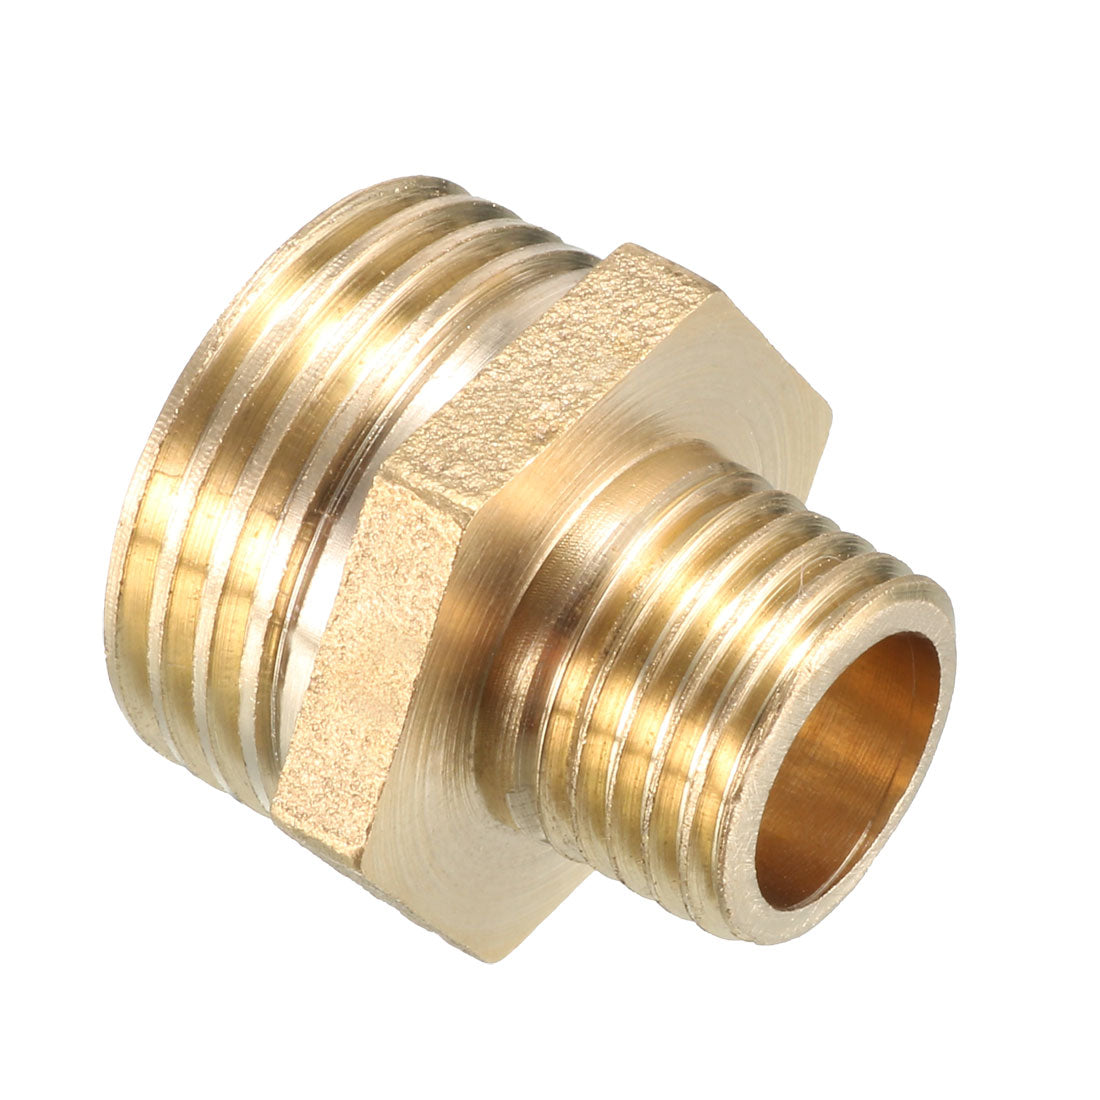 uxcell Uxcell Brass Pipe Fitting Reducing Hex Bushing 1/2 BSP Male x 1/4 BSP Male Adapter